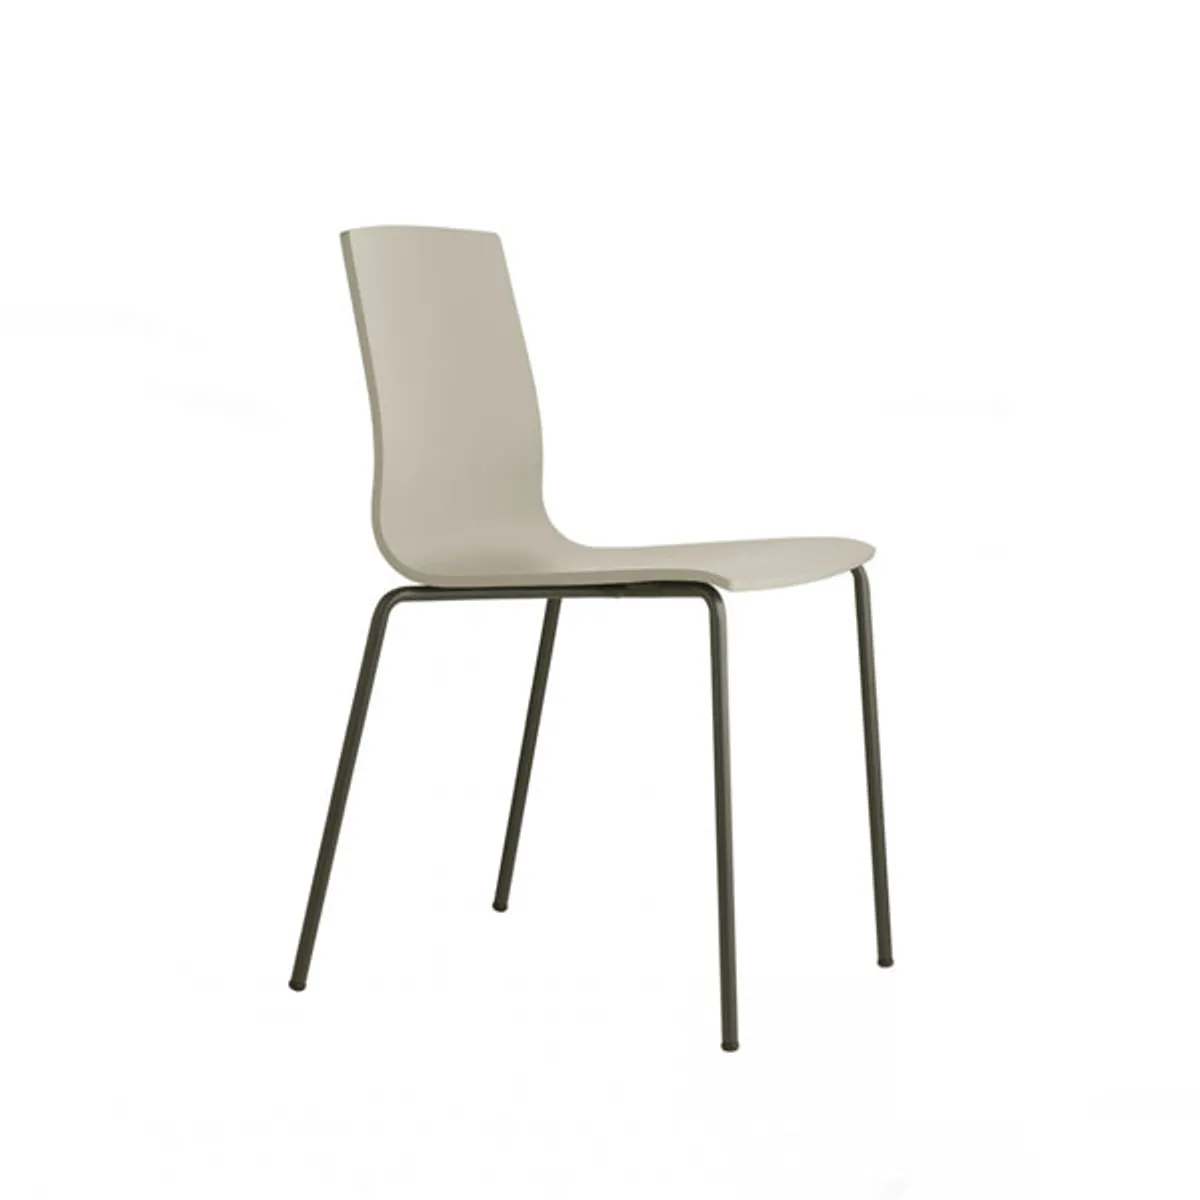 Evie 2 metal side chair 4 Inside Out Contracts